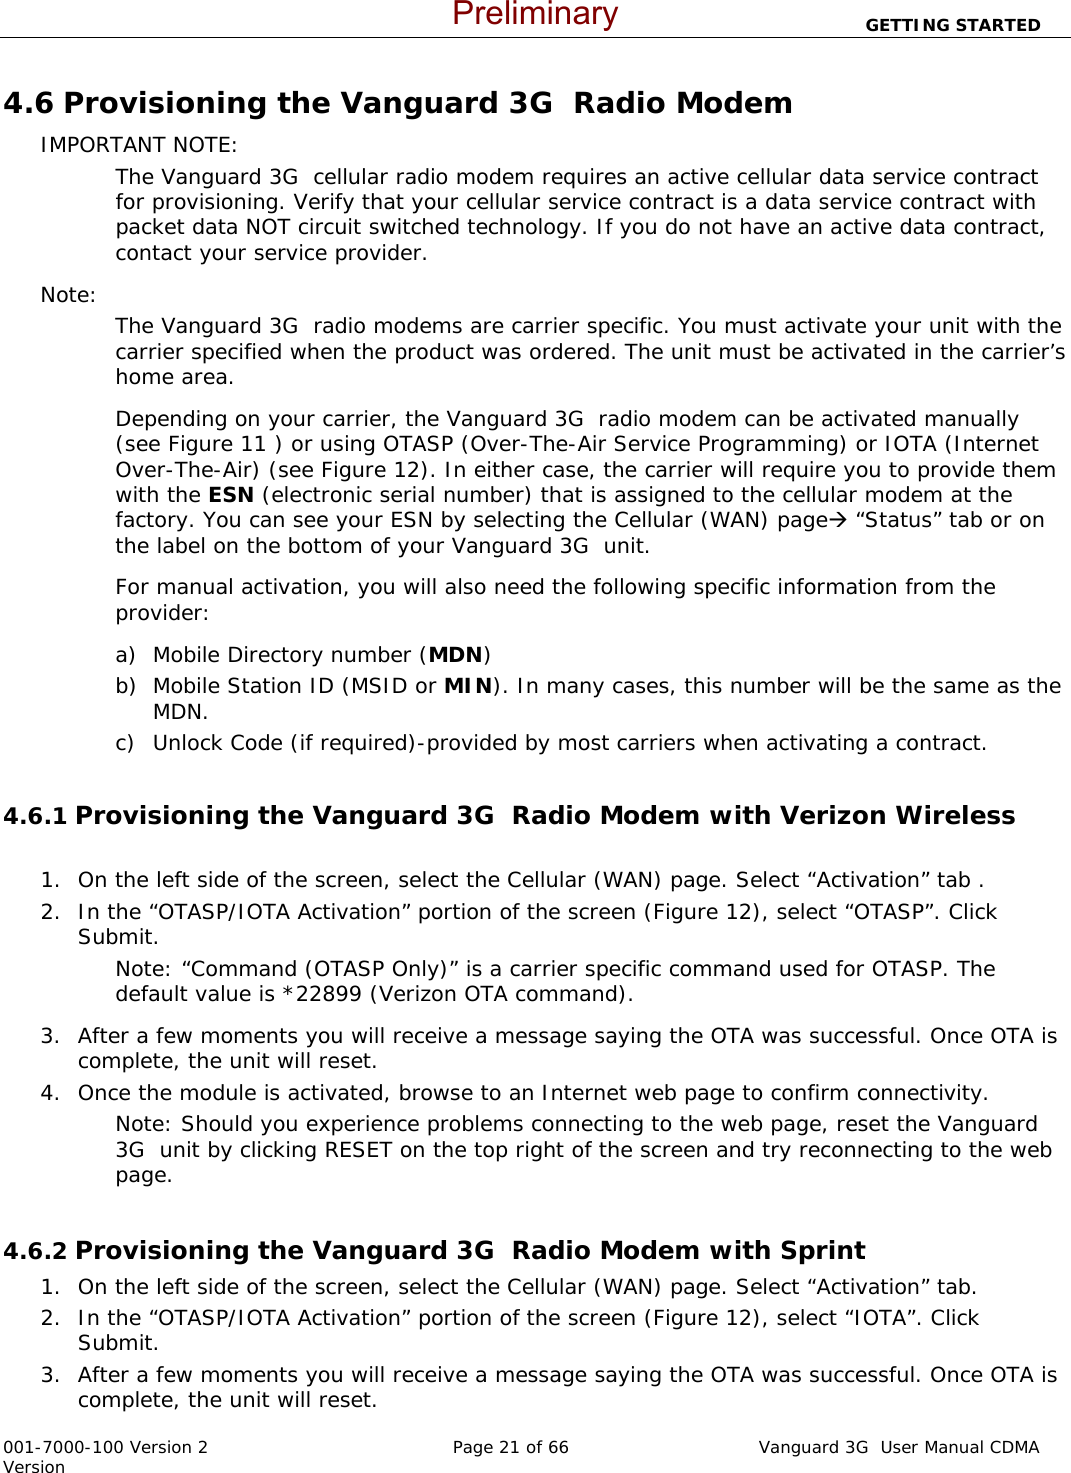                          GETTING STARTED  001-7000-100 Version 2       Page 21 of 66       Vanguard 3G  User Manual CDMA Version 4.6 Provisioning the Vanguard 3G  Radio Modem  IMPORTANT NOTE: The Vanguard 3G  cellular radio modem requires an active cellular data service contract for provisioning. Verify that your cellular service contract is a data service contract with packet data NOT circuit switched technology. If you do not have an active data contract, contact your service provider.   Note:   The Vanguard 3G  radio modems are carrier specific. You must activate your unit with the carrier specified when the product was ordered. The unit must be activated in the carrier’s home area. Depending on your carrier, the Vanguard 3G  radio modem can be activated manually (see Figure 11 ) or using OTASP (Over-The-Air Service Programming) or IOTA (Internet Over-The-Air) (see Figure 12). In either case, the carrier will require you to provide them with the ESN (electronic serial number) that is assigned to the cellular modem at the factory. You can see your ESN by selecting the Cellular (WAN) pageÆ “Status” tab or on the label on the bottom of your Vanguard 3G  unit.  For manual activation, you will also need the following specific information from the provider:  a) Mobile Directory number (MDN) b) Mobile Station ID (MSID or MIN). In many cases, this number will be the same as the MDN. c) Unlock Code (if required)-provided by most carriers when activating a contract.   4.6.1 Provisioning the Vanguard 3G  Radio Modem with Verizon Wireless       1. On the left side of the screen, select the Cellular (WAN) page. Select “Activation” tab . 2. In the “OTASP/IOTA Activation” portion of the screen (Figure 12), select “OTASP”. Click Submit.  Note: “Command (OTASP Only)” is a carrier specific command used for OTASP. The default value is *22899 (Verizon OTA command).  3. After a few moments you will receive a message saying the OTA was successful. Once OTA is complete, the unit will reset.  4. Once the module is activated, browse to an Internet web page to confirm connectivity.  Note: Should you experience problems connecting to the web page, reset the Vanguard 3G  unit by clicking RESET on the top right of the screen and try reconnecting to the web page.   4.6.2 Provisioning the Vanguard 3G  Radio Modem with Sprint 1. On the left side of the screen, select the Cellular (WAN) page. Select “Activation” tab. 2. In the “OTASP/IOTA Activation” portion of the screen (Figure 12), select “IOTA”. Click Submit.  3. After a few moments you will receive a message saying the OTA was successful. Once OTA is complete, the unit will reset.  Preliminary